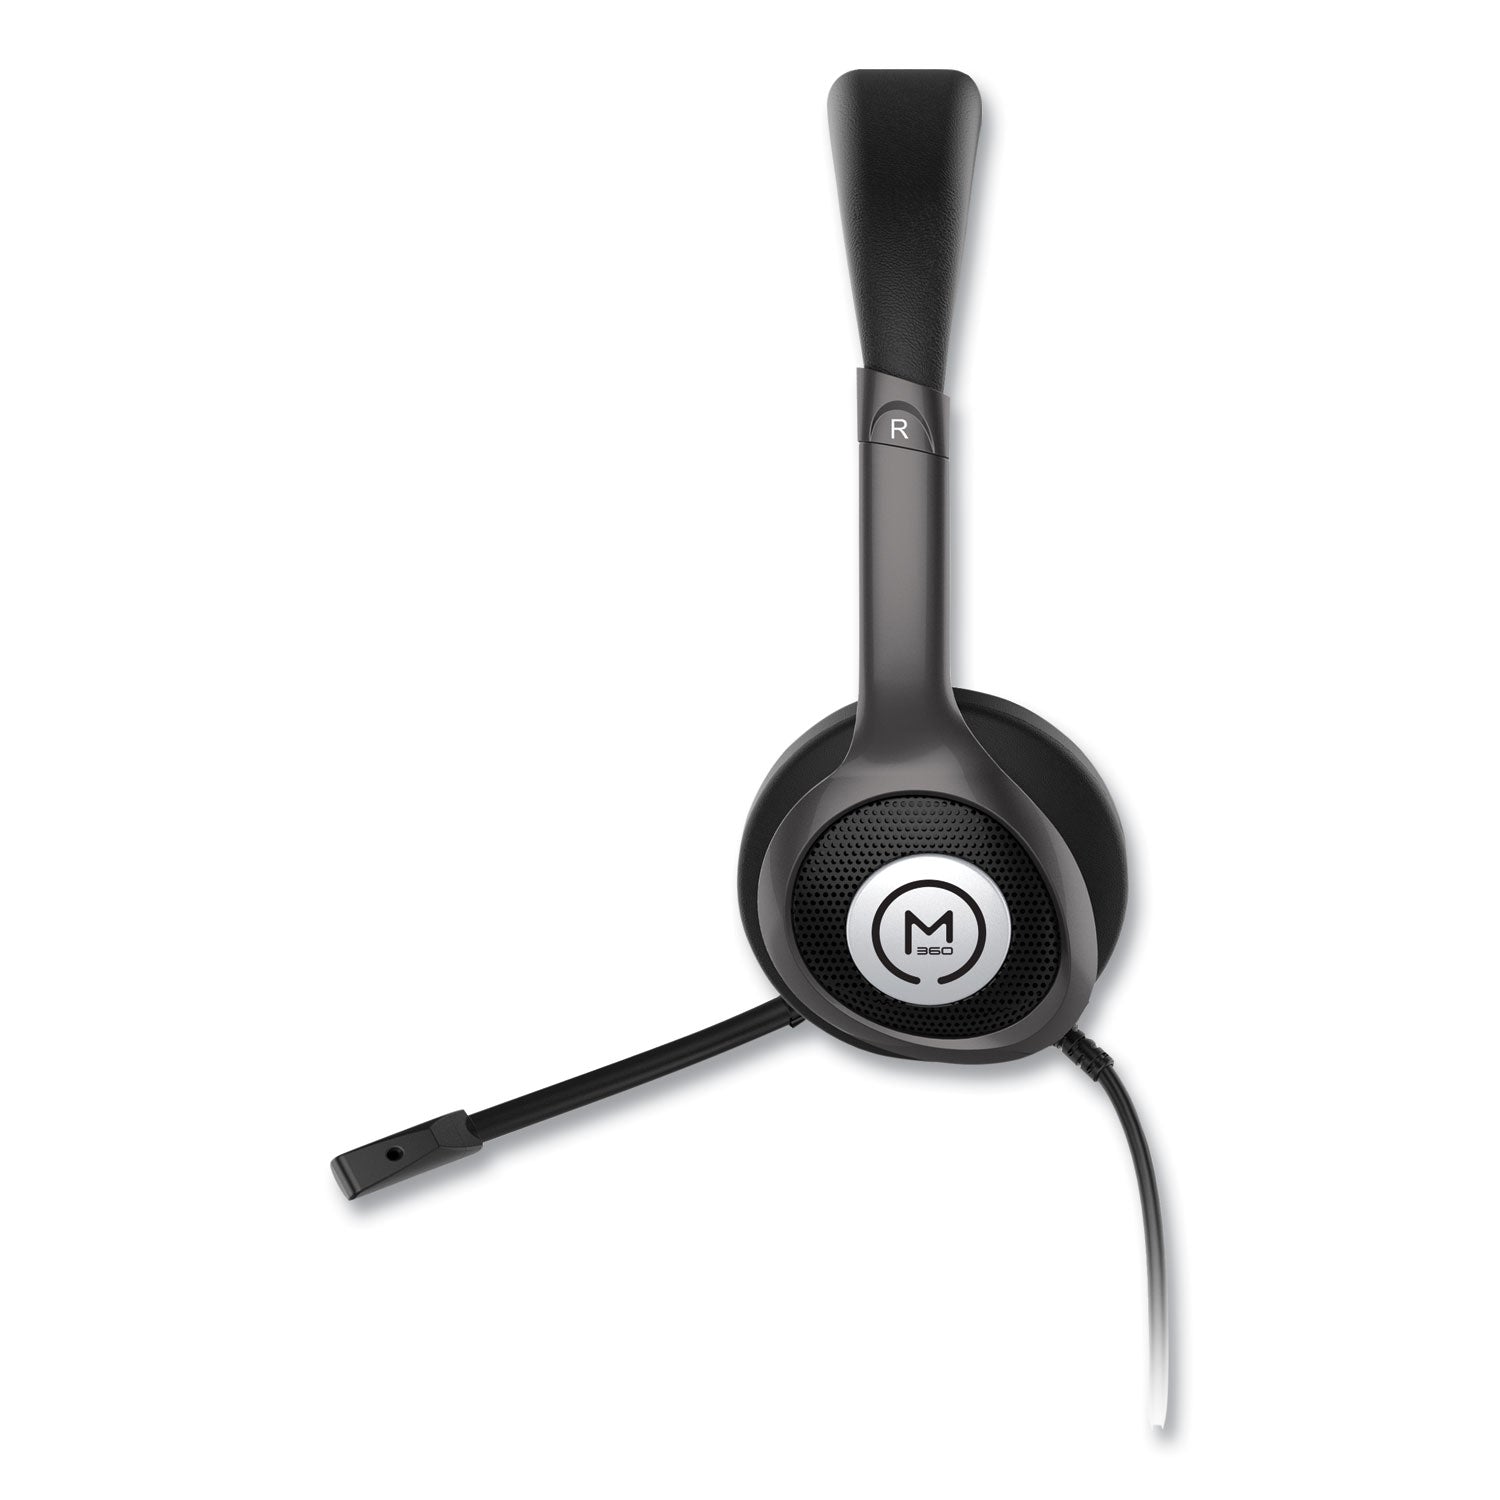 hs5600su-connect-usb-stereo-headset-with-boom-microphone_mhshs5600su - 1